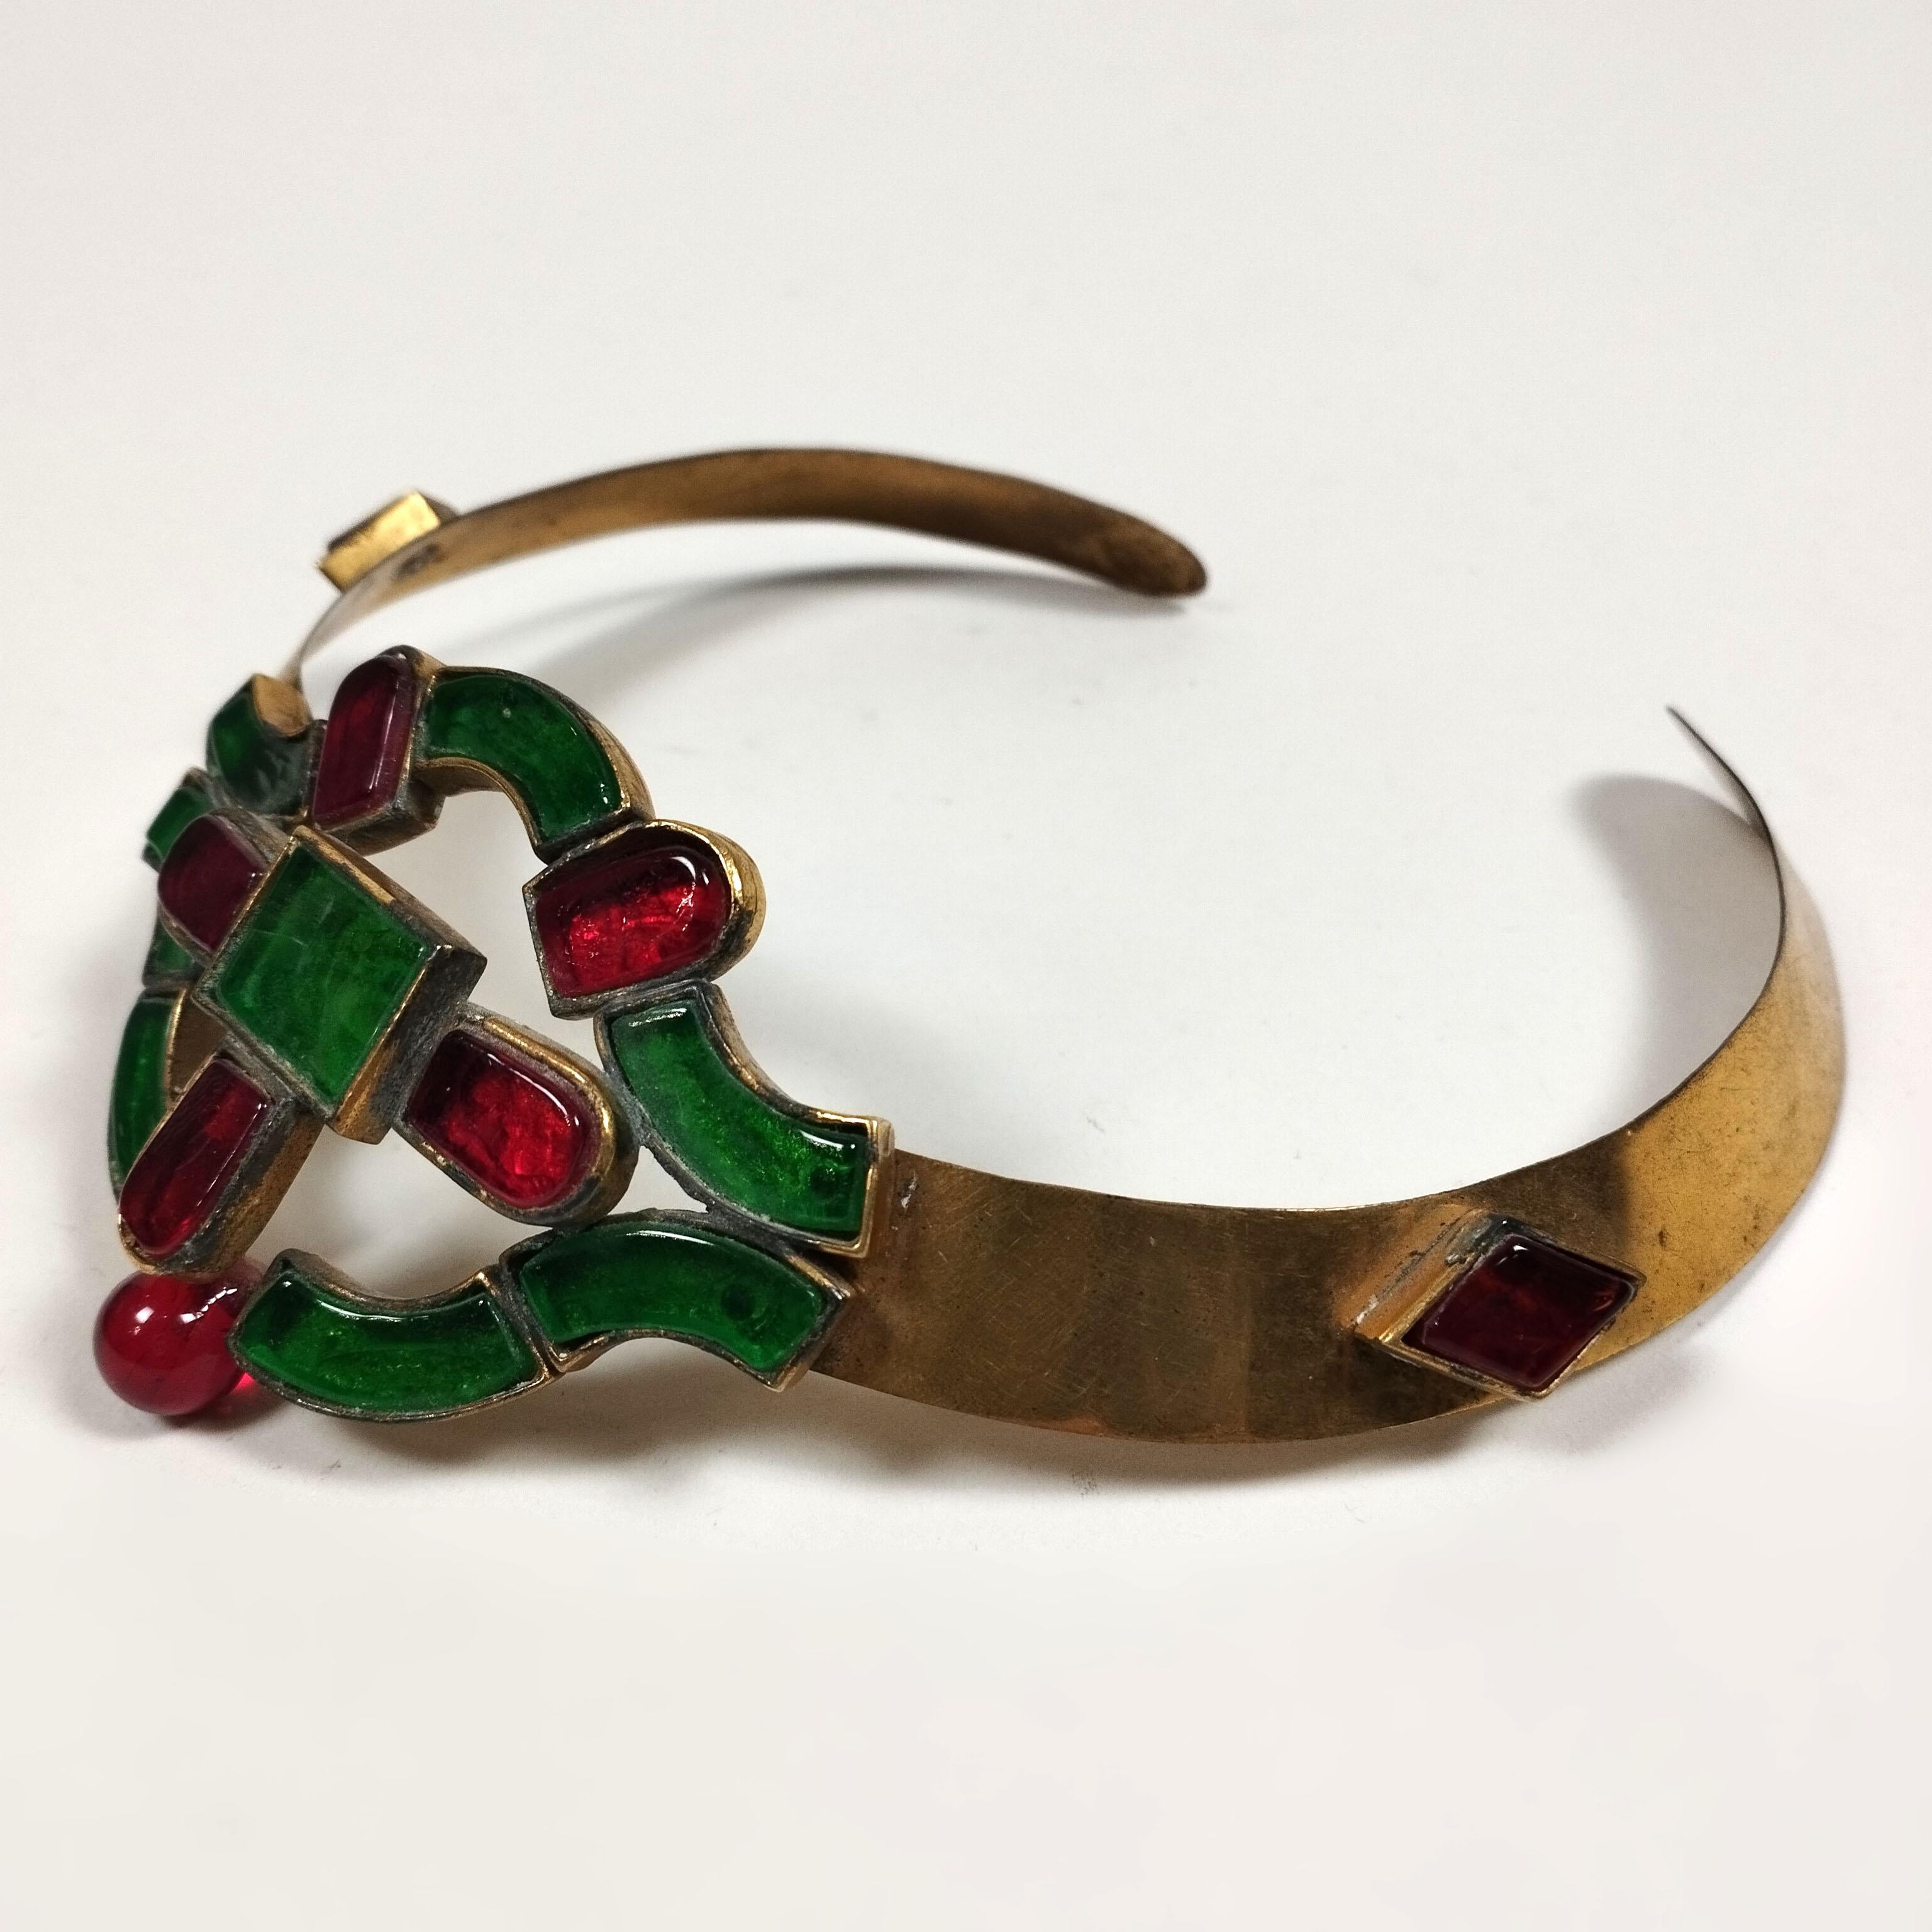 A 1990s French brass and painted glass choker by Chanel, manufactured by Maison Gripoix. The Art Decó design shows glasses in green and red. Sealed on the back.